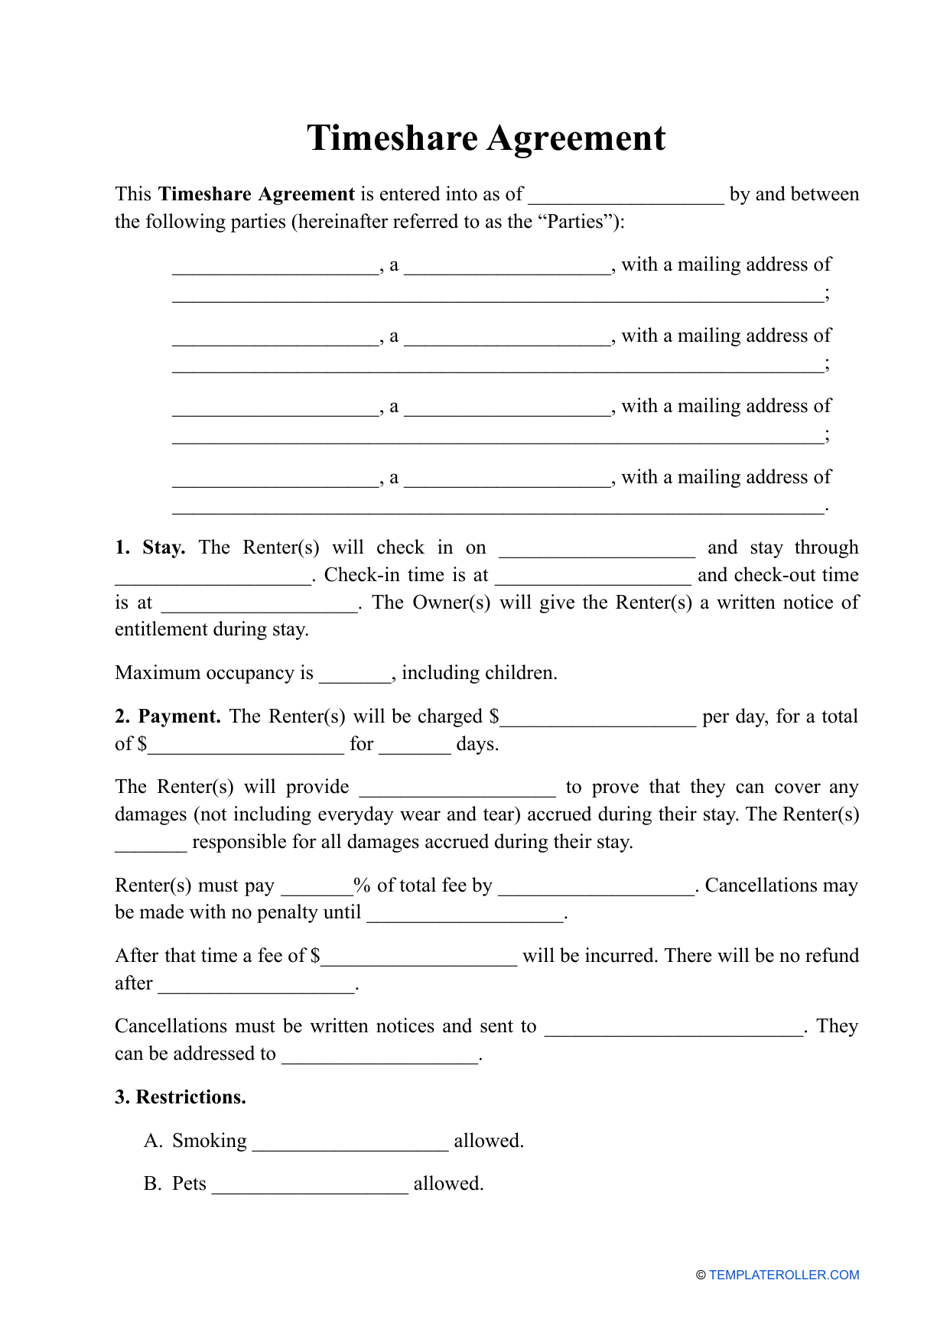 Timeshare Agreement Template, Page 1